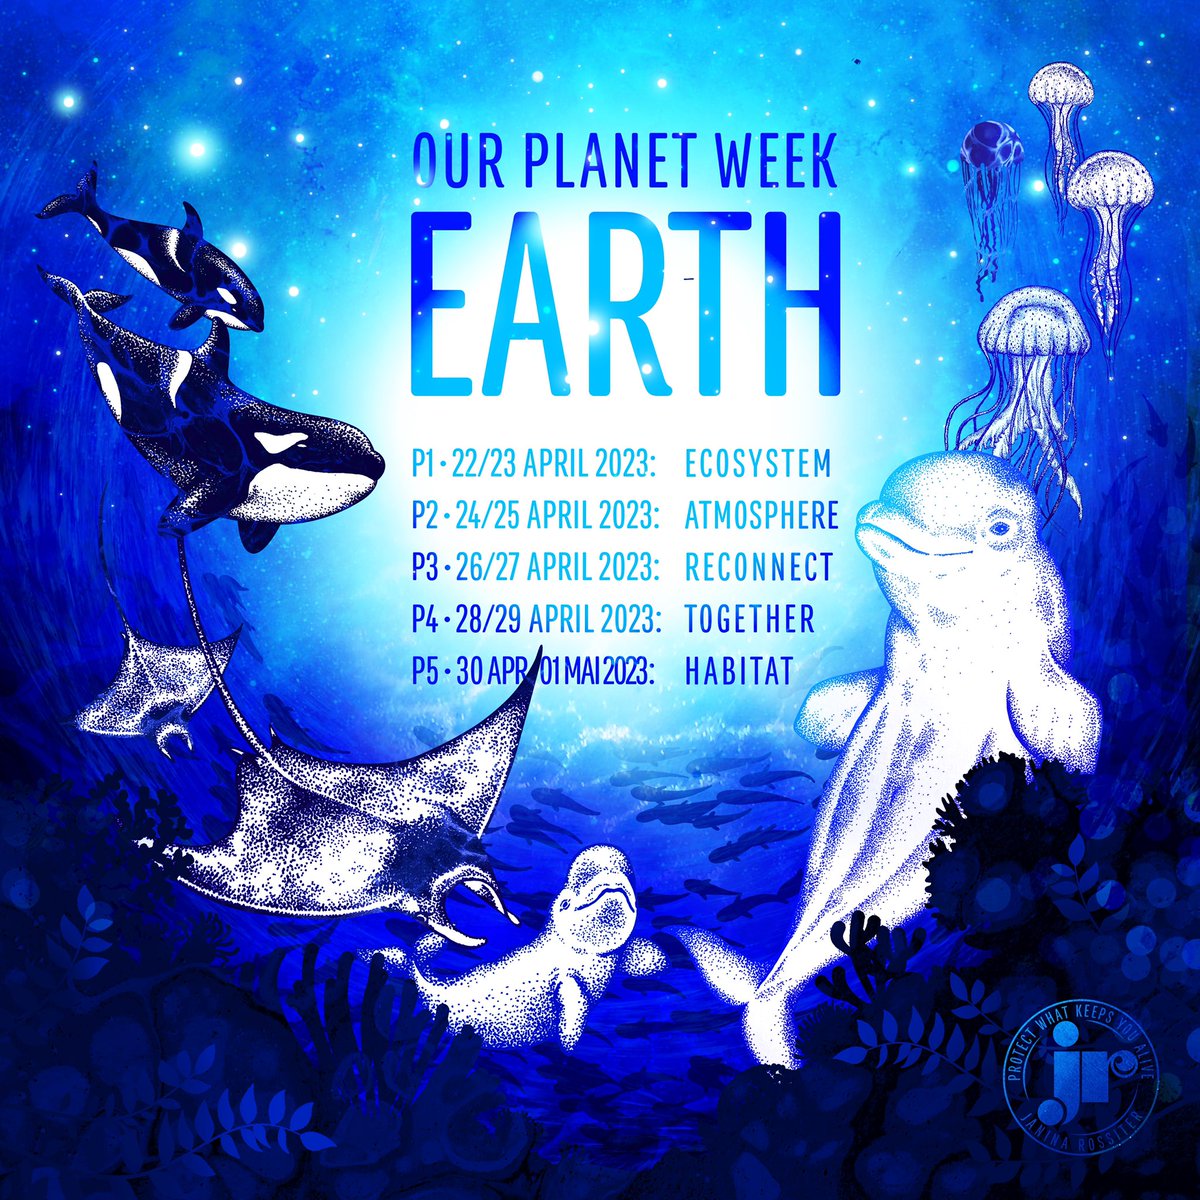 🎨 Calling all artists and nature enthusiasts for this Illustration Challenge! #OurPlanetWeek starts on April 22nd #earthday 

prompts:
E * April 22/23: Ecosystem
A * 24/25: Atmosphere
R * 26/27: Reconnect
T * 28/29: Together
H * April 30/May 1: Habitat